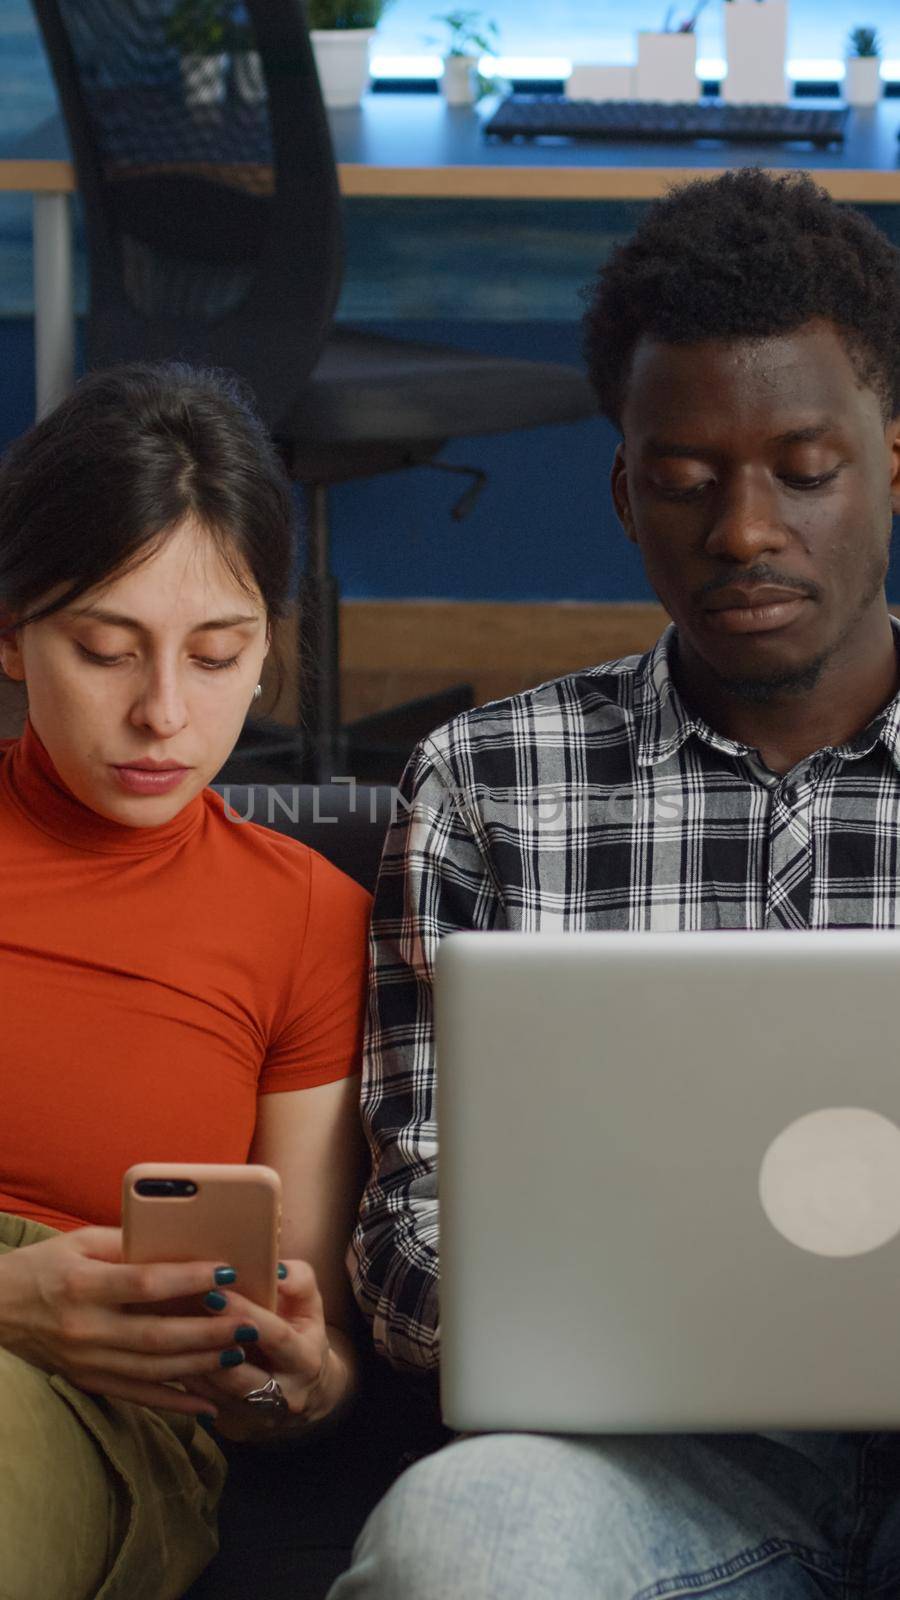 Modern interracial couple with technology sitting on sofa together in living room. Mixed race married lovers using smartphone and laptop at home on couch. Multi ethnic family with gadgets